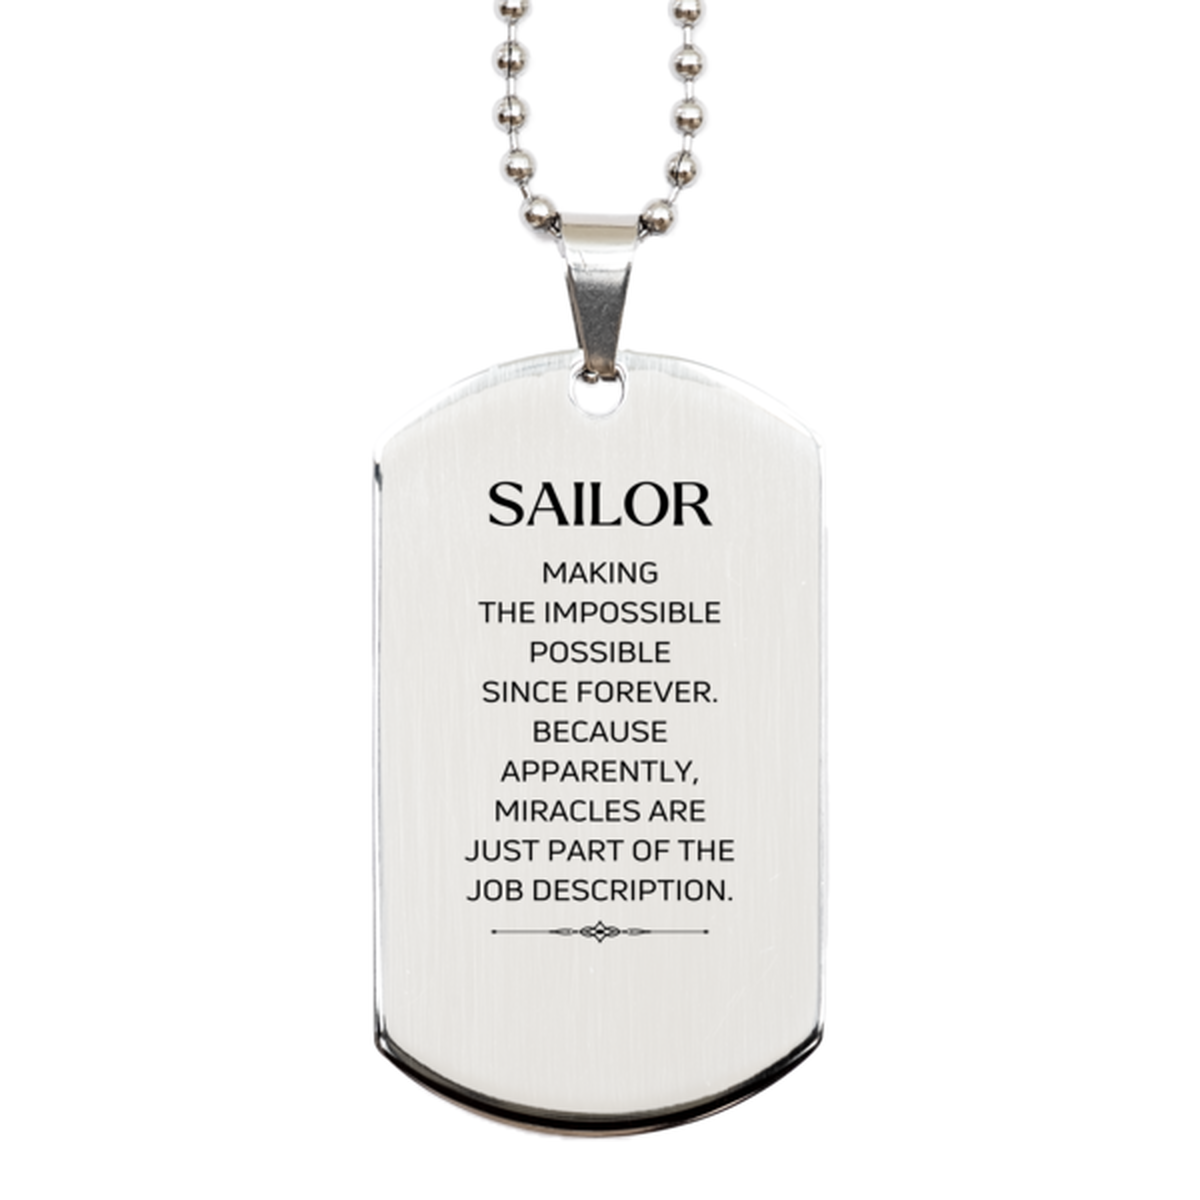 Funny Sailor Gifts, Miracles are just part of the job description, Inspirational Birthday Silver Dog Tag For Sailor, Men, Women, Coworkers, Friends, Boss